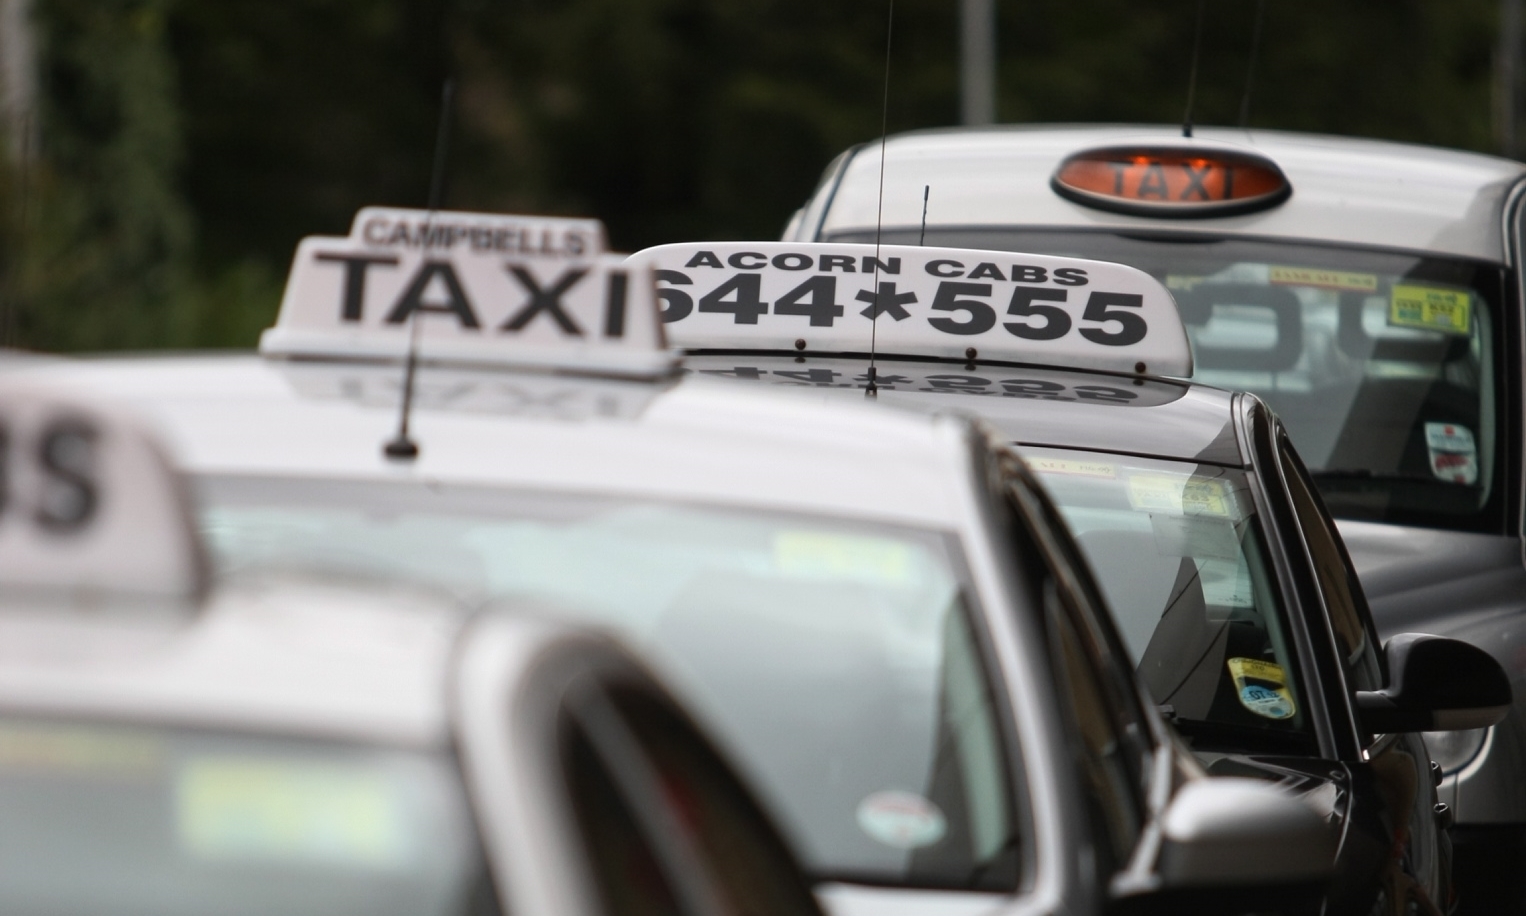 DOUGIE NICOLSON, COURIER, 29/08/11, NEWS. Pic shows a line up of taxis on a rank in Kirkcaldy today, Monday 29th August 2011. To go with story about taxi services in Fife.